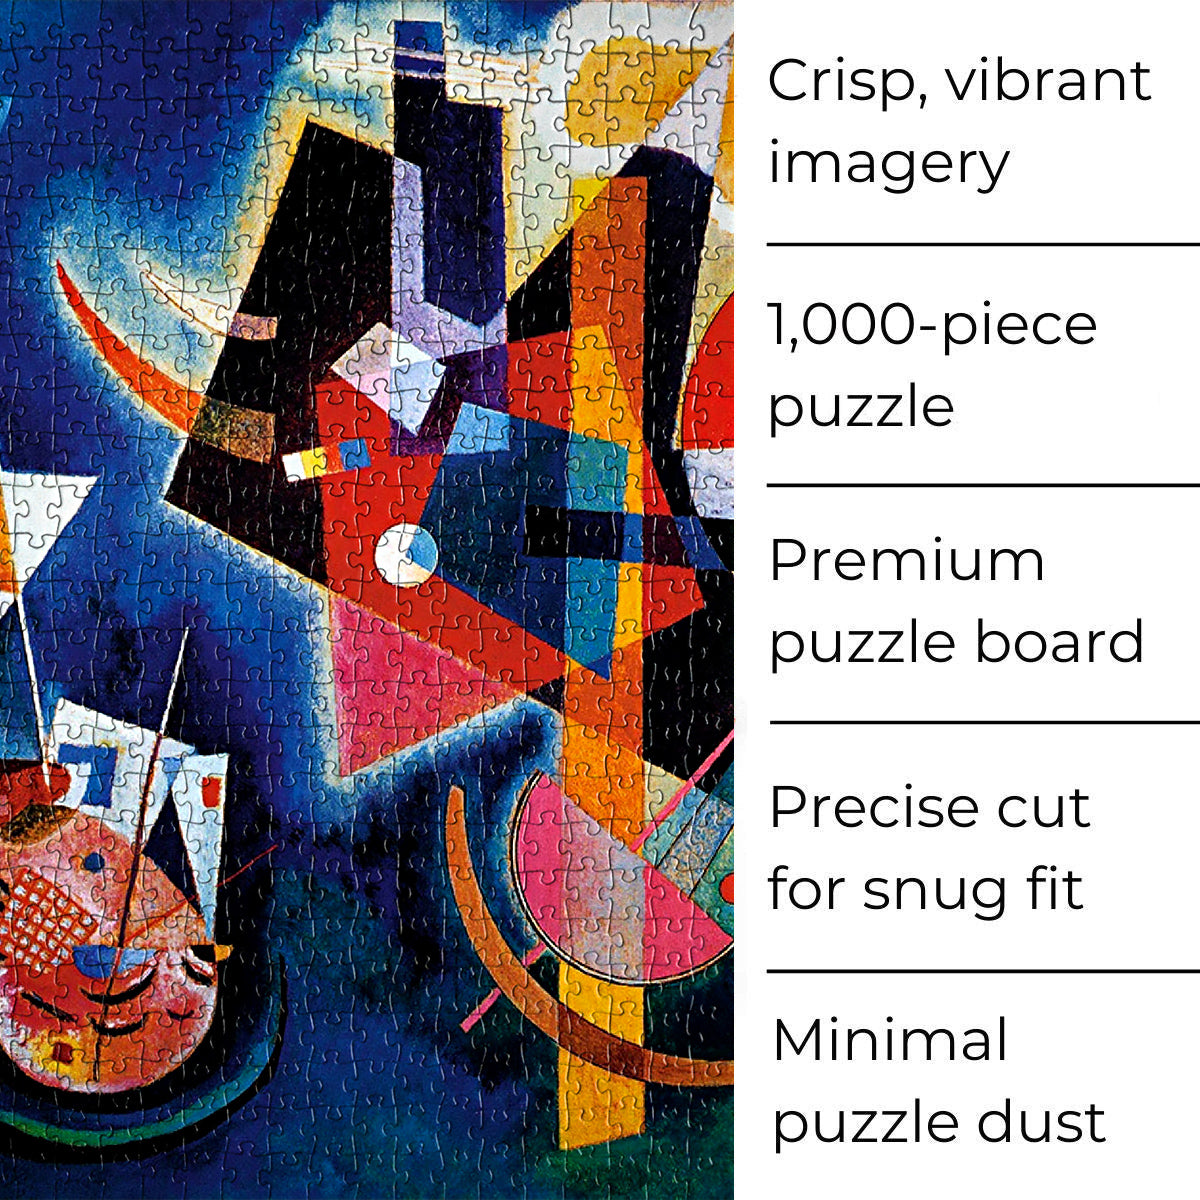 1000-Piece Kandinsky In Blue Jigsaw Puzzle: A challenging Eurographics puzzle for interior design enthusiasts